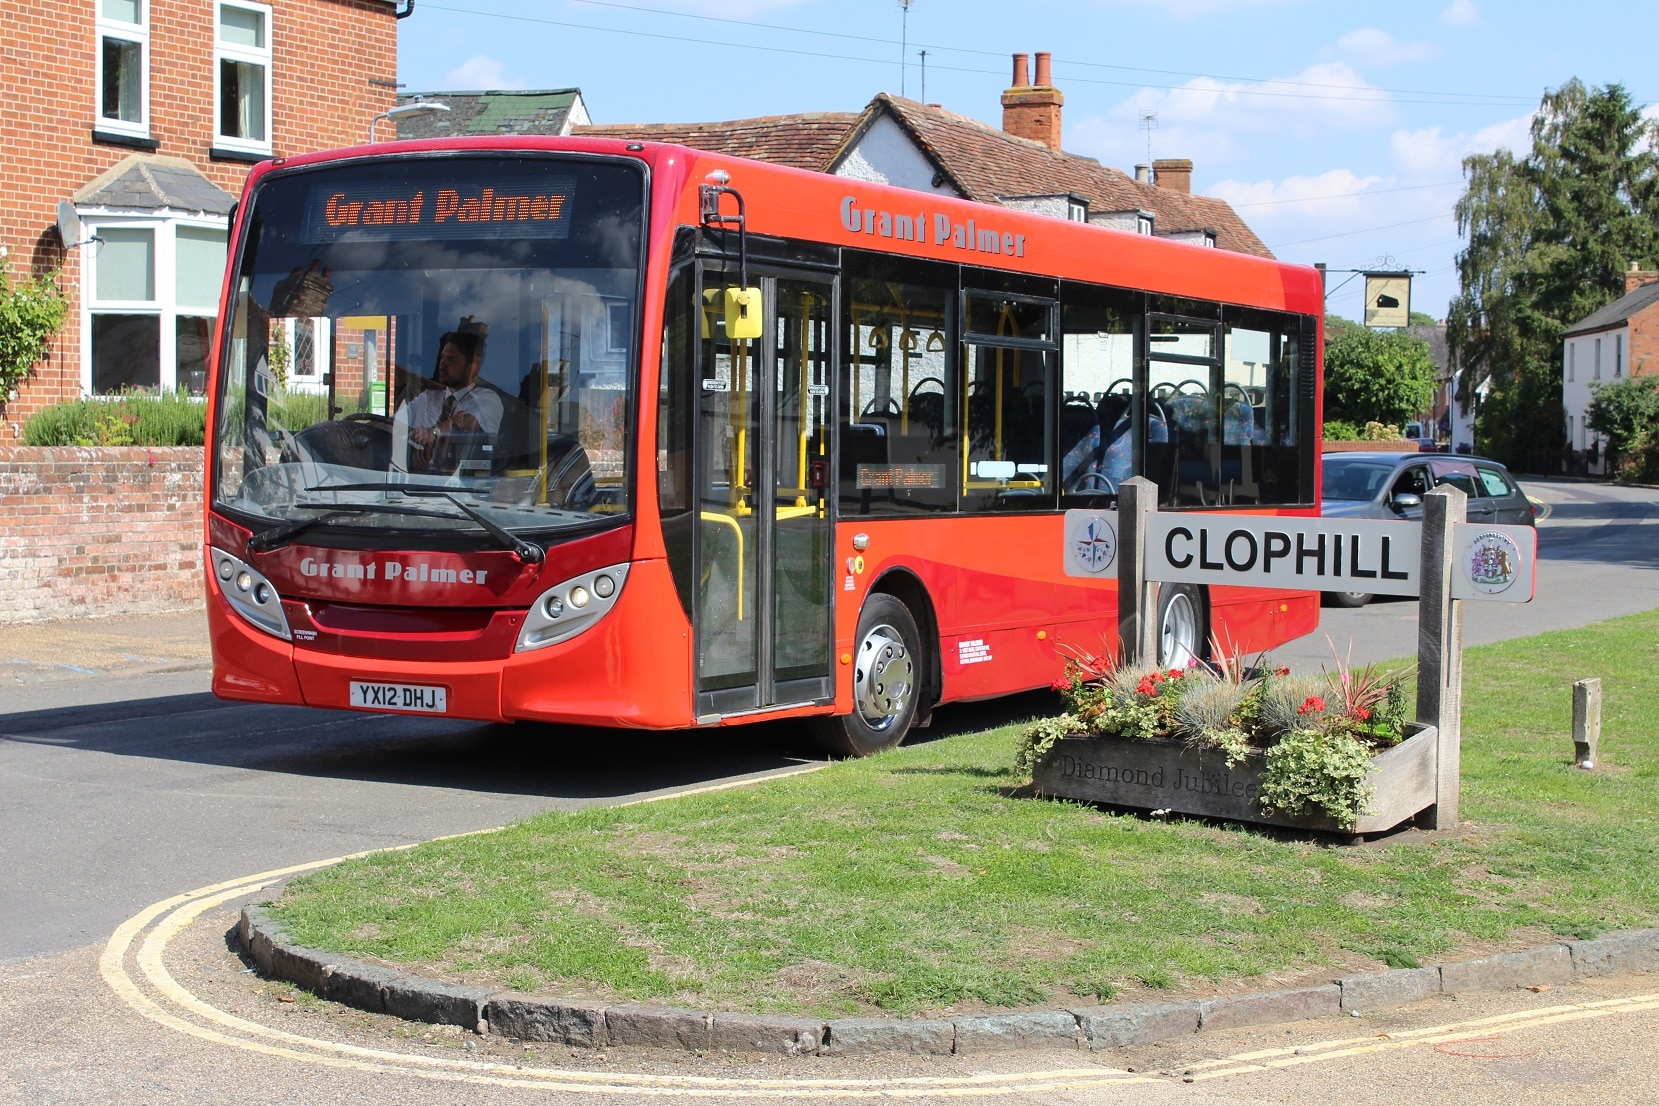 Bus stop removal plans cause controversey